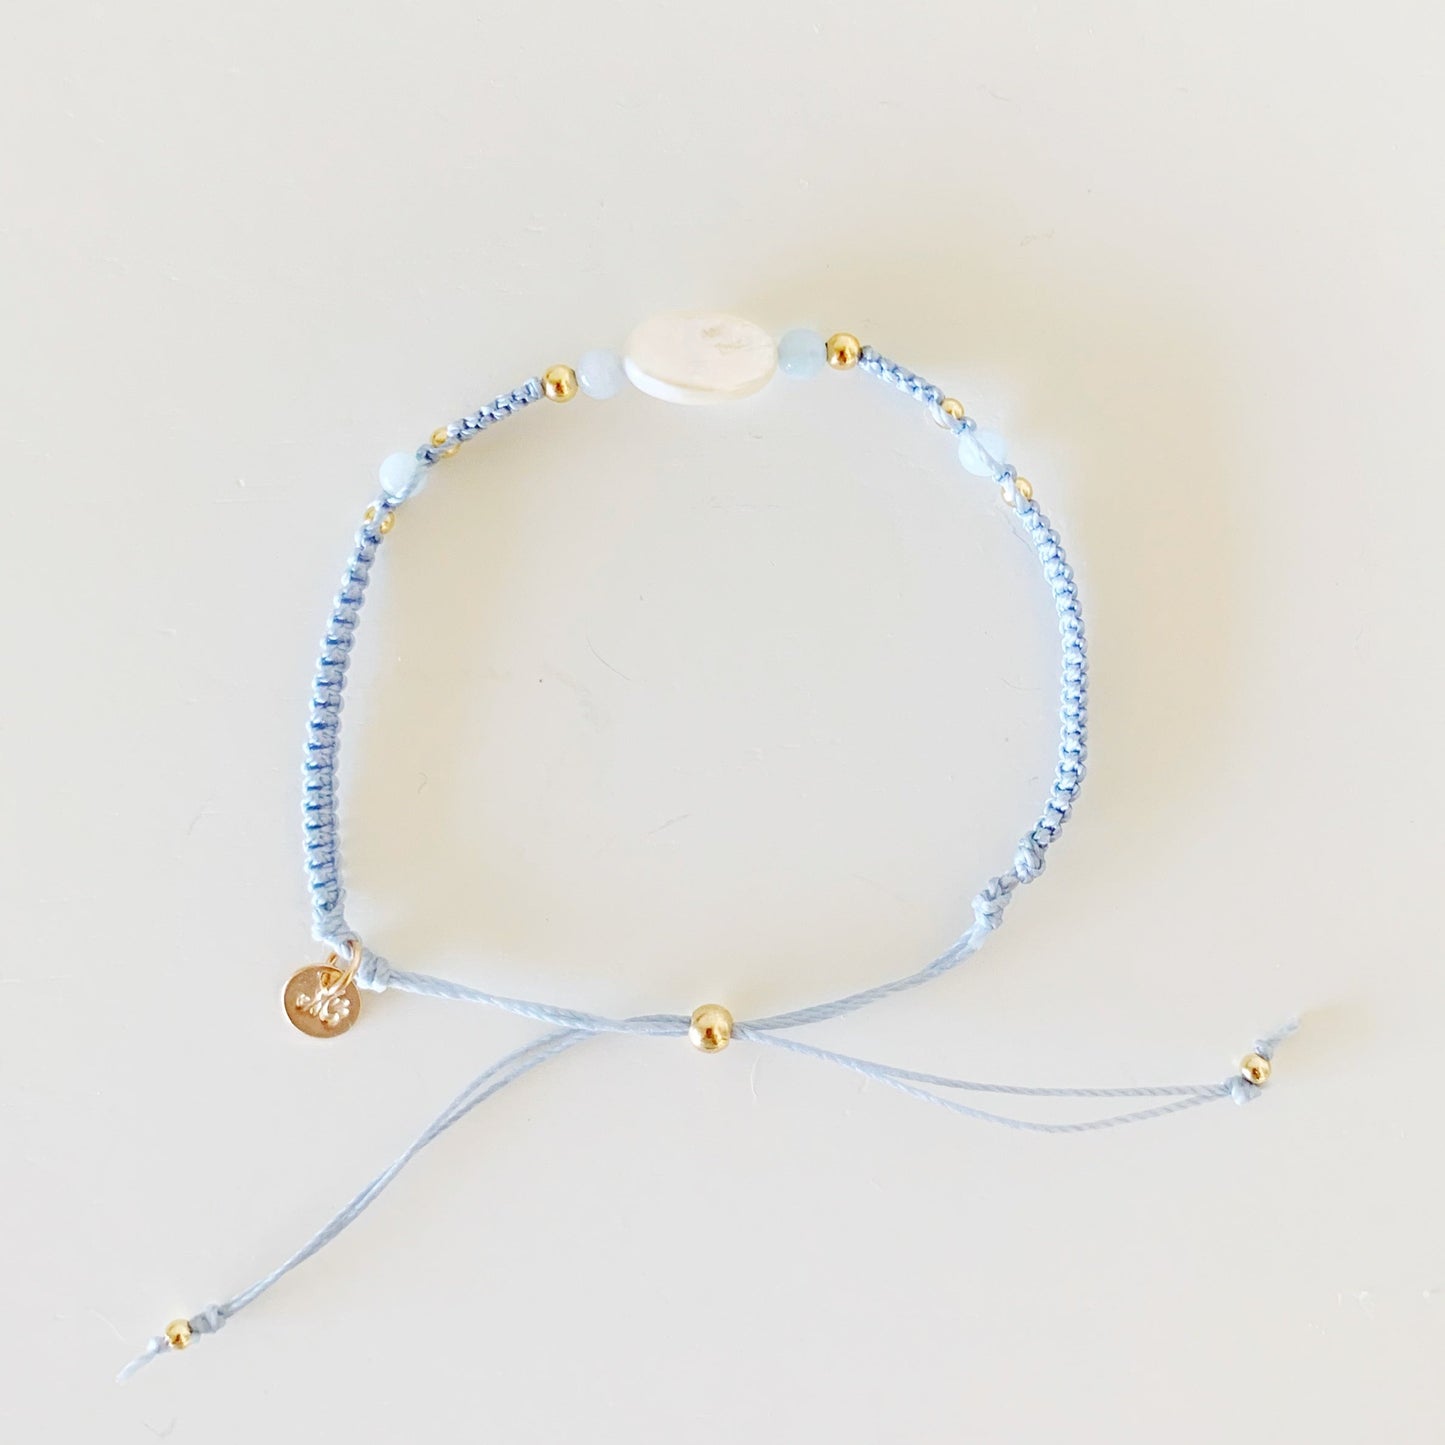 the regal seagull bracelet is a mermaids and madeleines design. its an adjustable macrame bracelet made with blue gray cord with a freshwater oval pearl at the center and aquamarine beads on both sides. this bracelet is photographed from the top down on a white surface